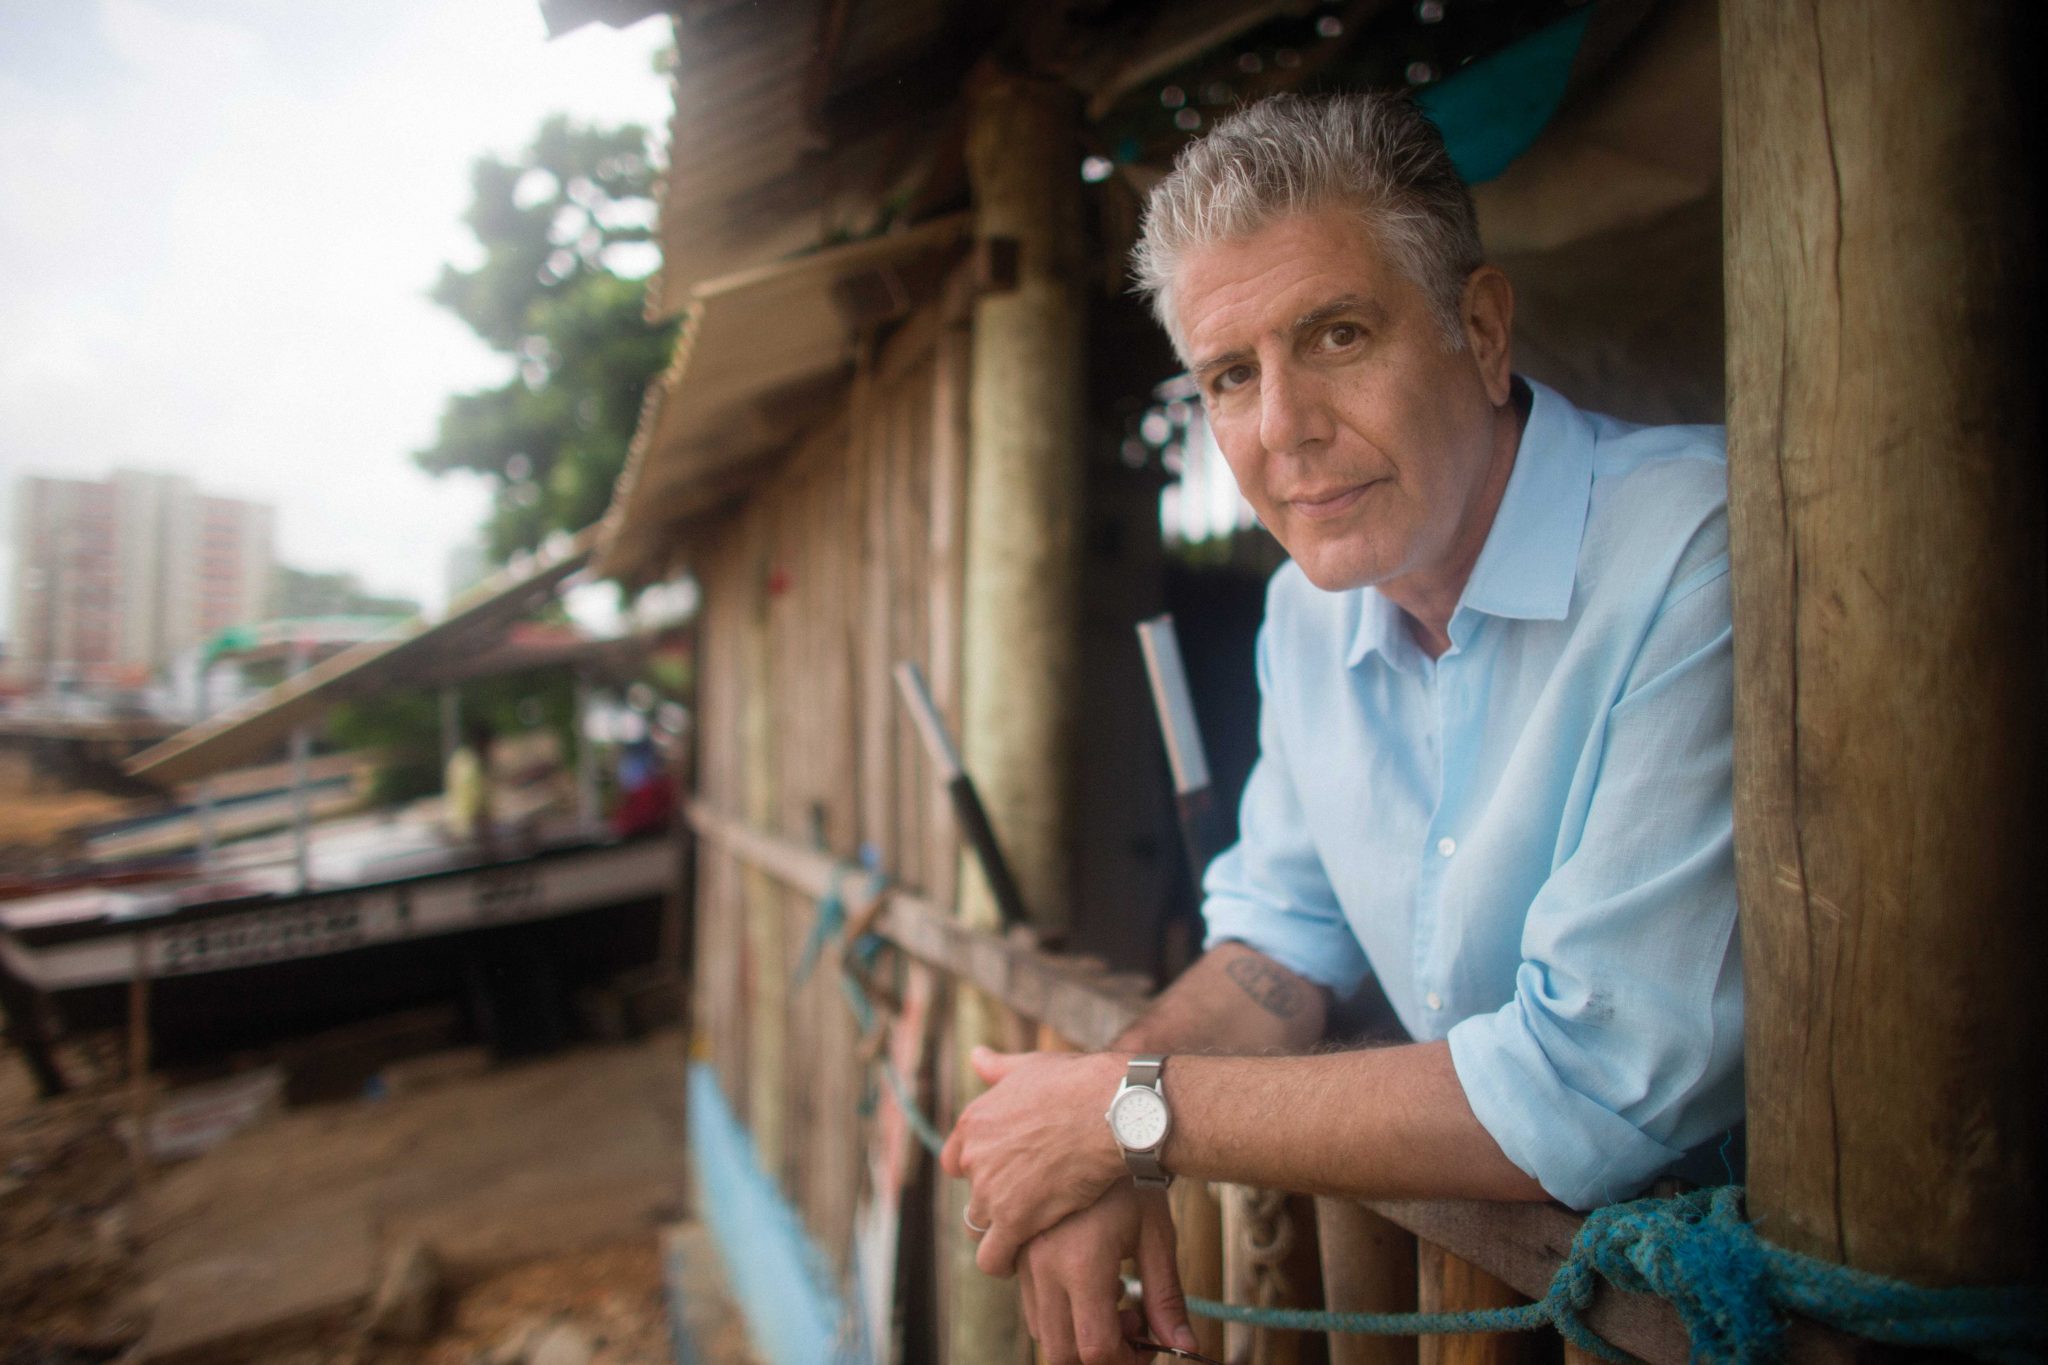 Anthony Bourdain – Not Your Typical Celebrity Chef